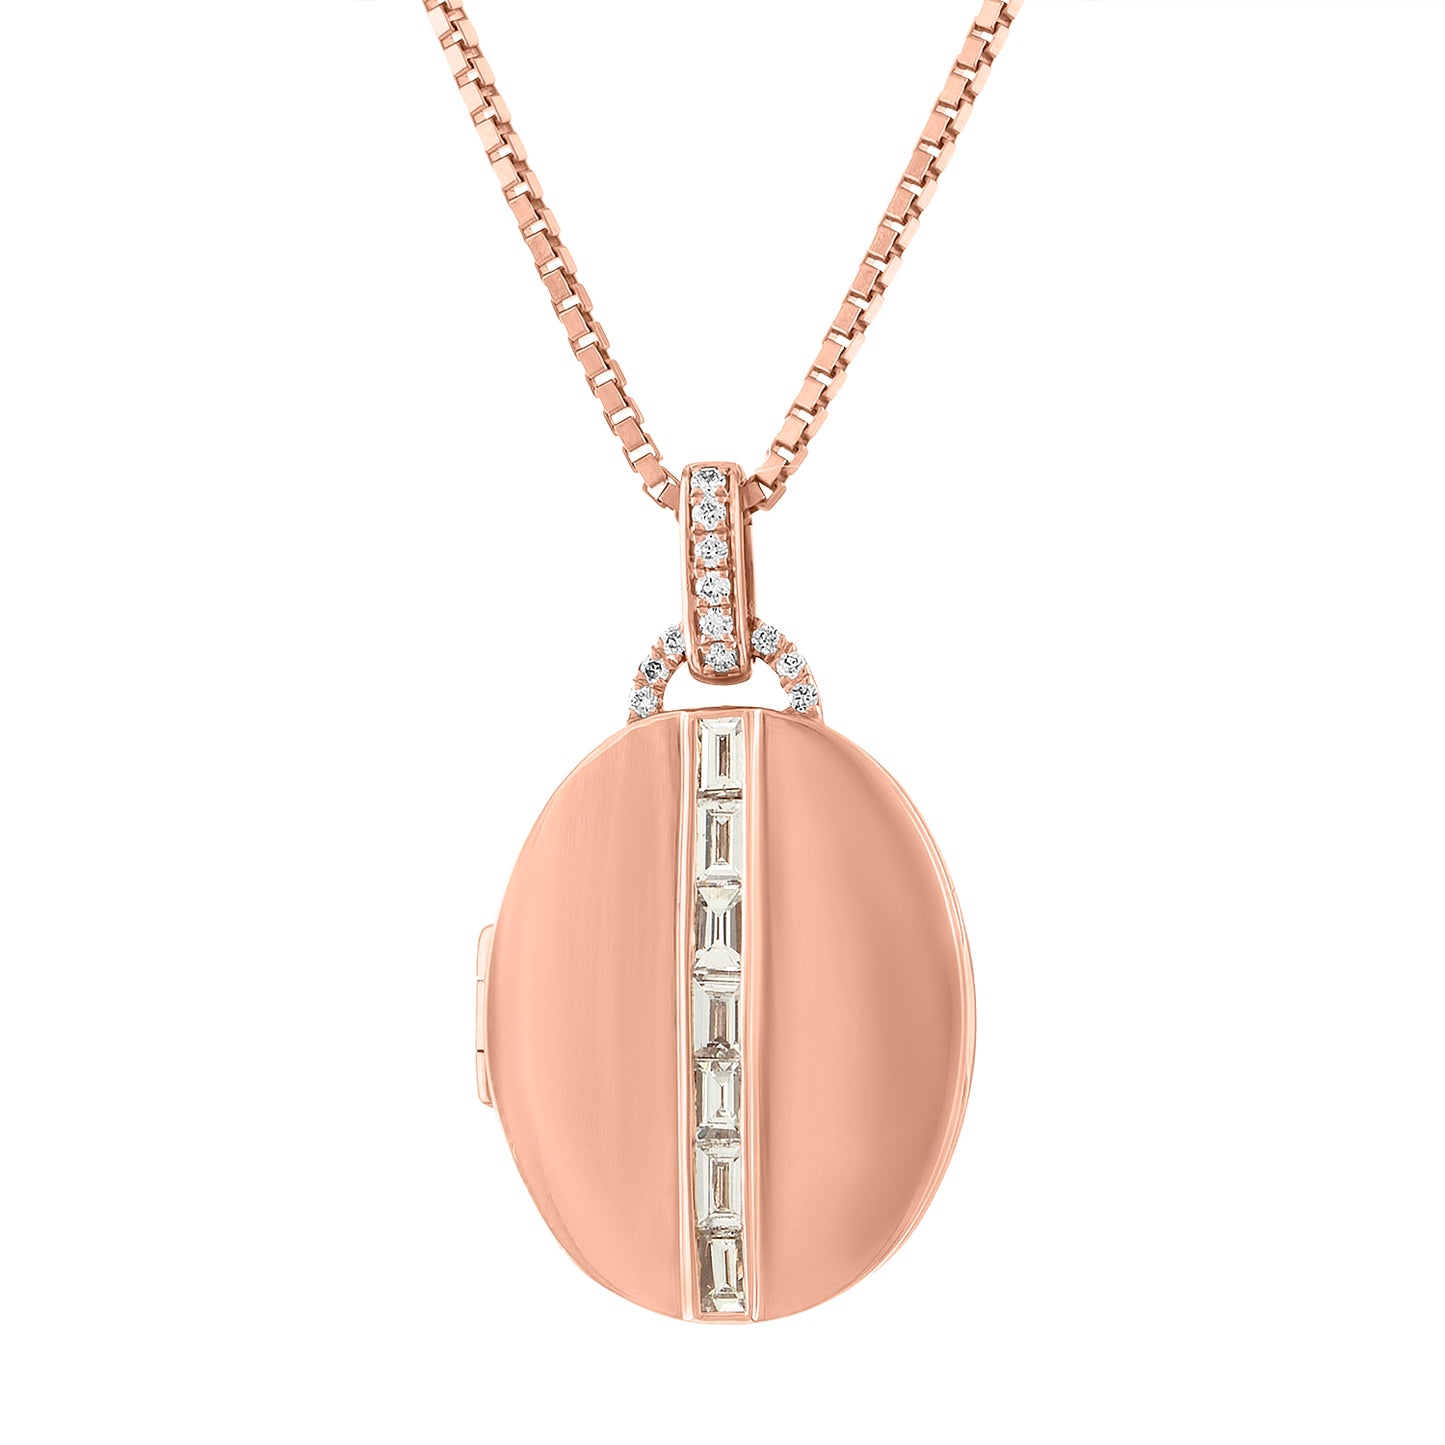 Rose gold oval locket with diamond baguettes down the center and round diamonds on the bail.